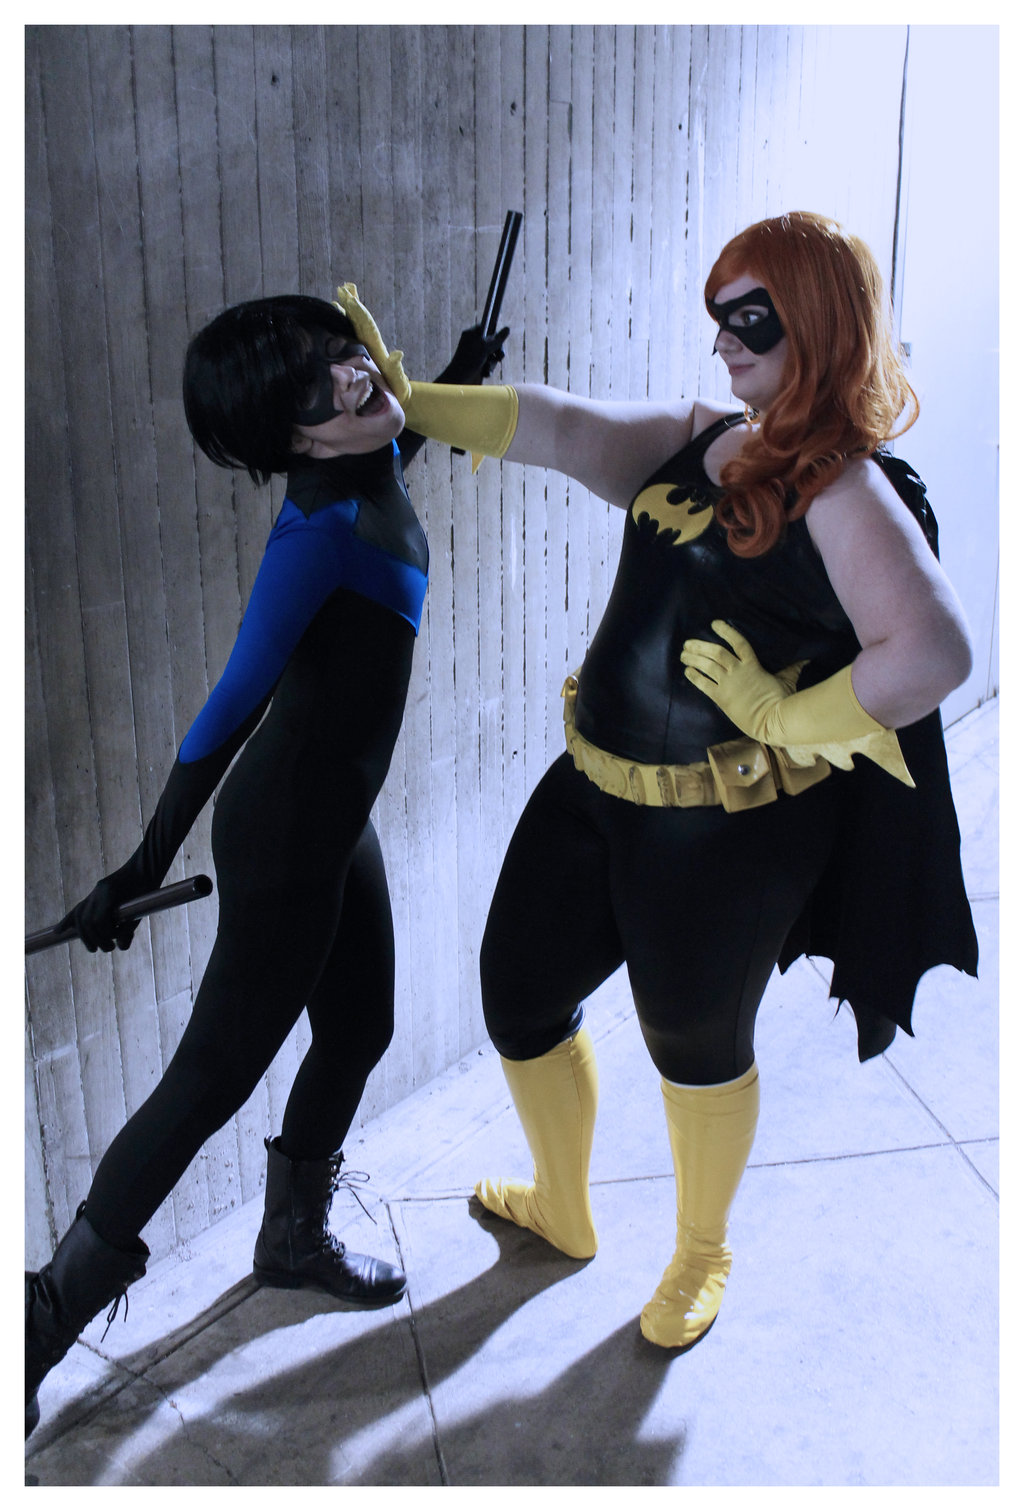 Nightwing and Batgirl by rizzapiff on